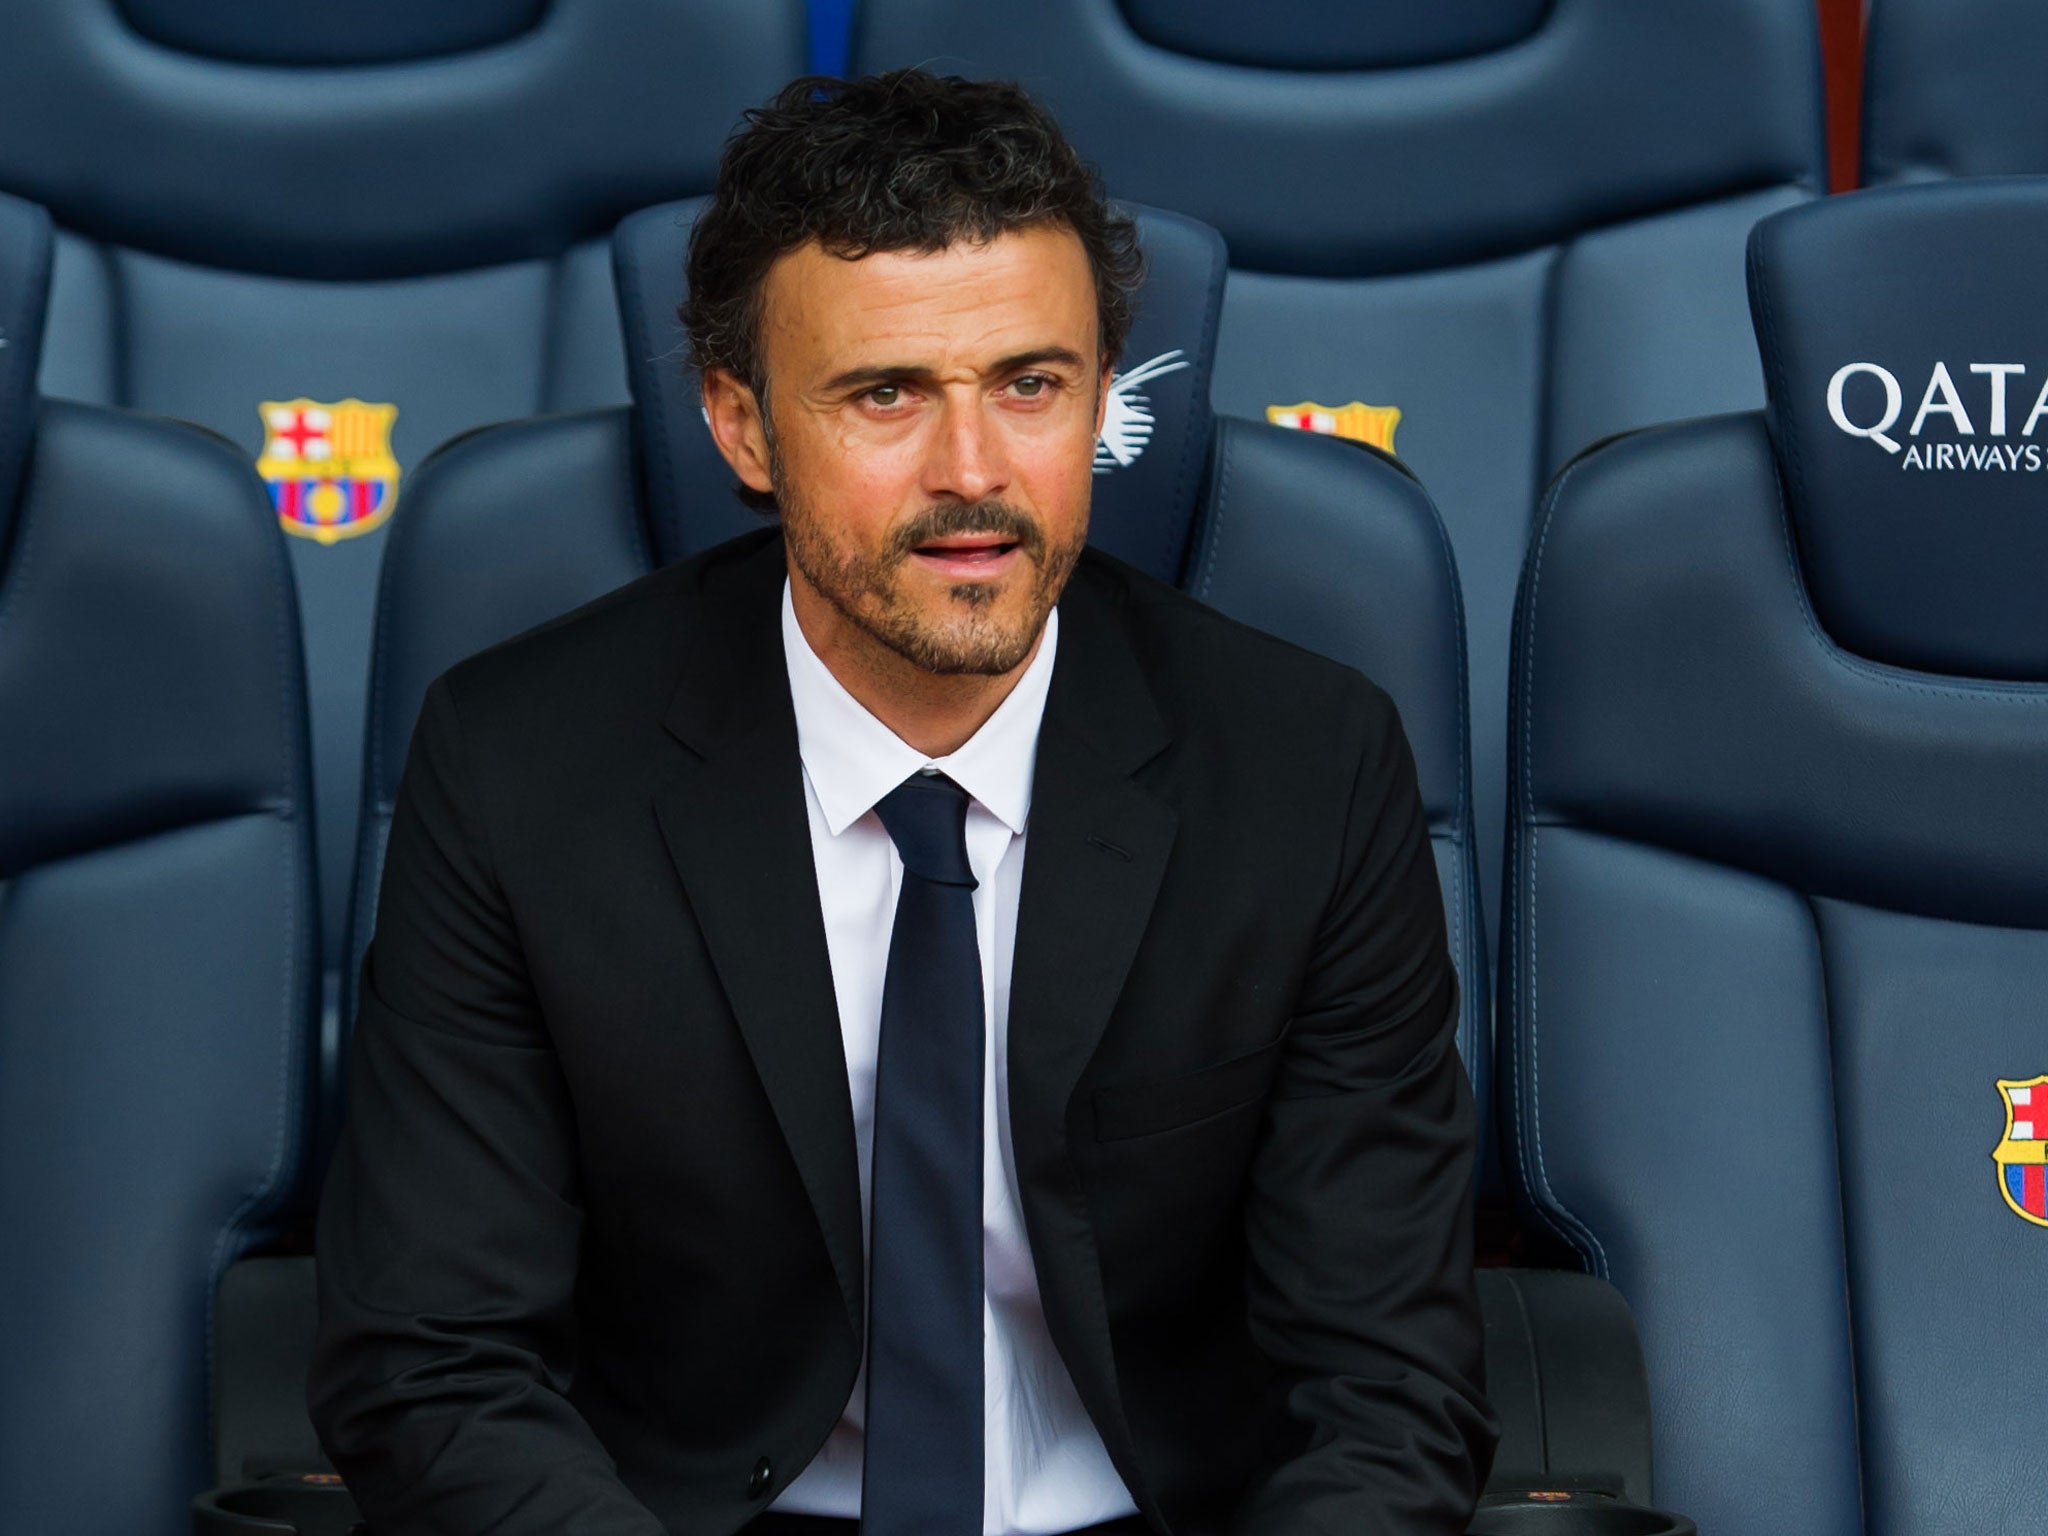 Newly appointed Barcelona manager Luis Enrique tries out his seat at the Nou Camp today